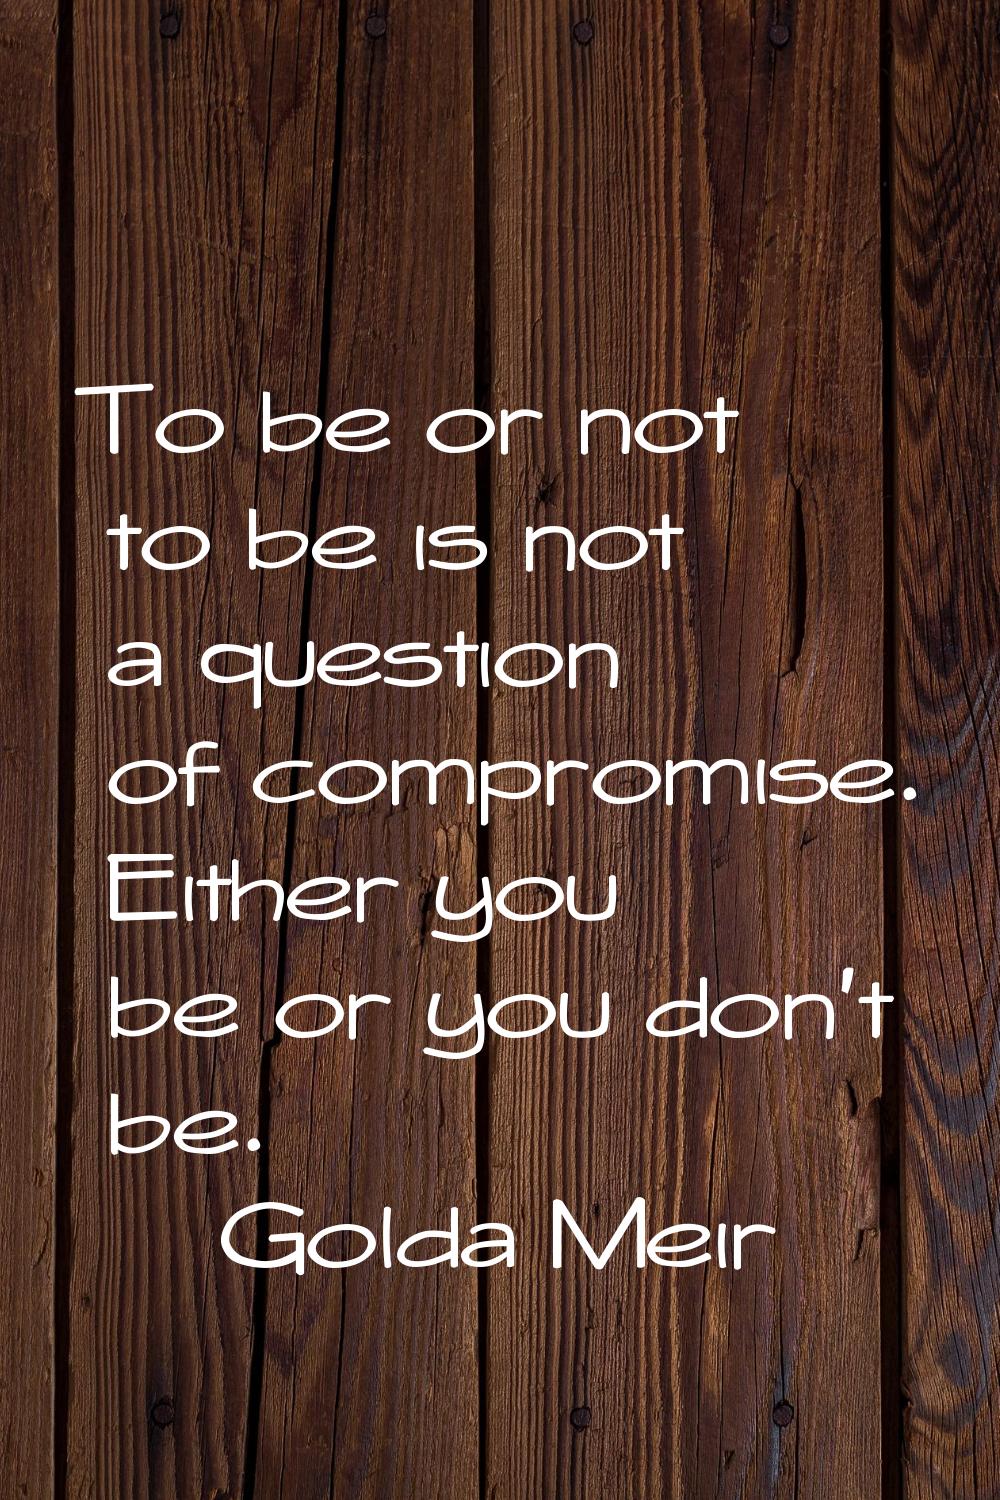 To be or not to be is not a question of compromise. Either you be or you don't be.